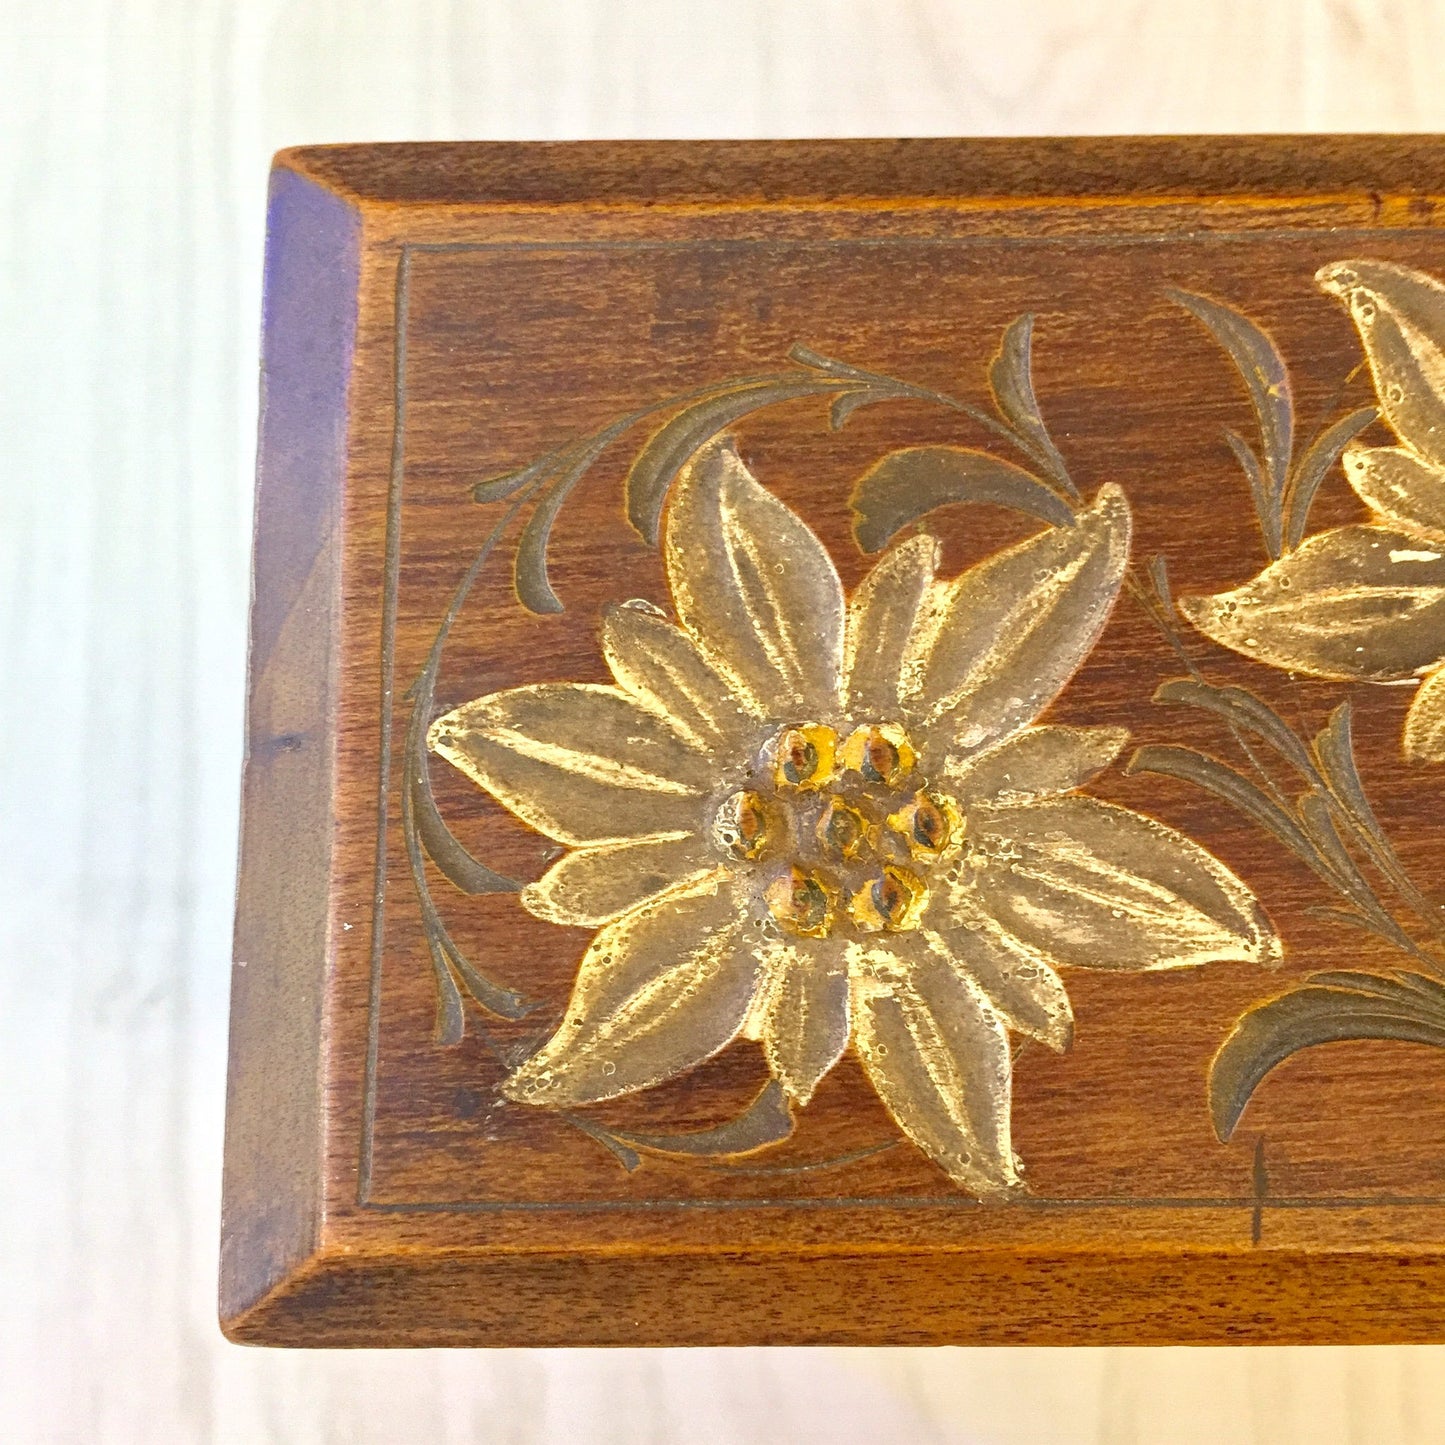 Decorative Polish hand-carved wooden box with floral design featuring a sunflower motif on the lid, crafted in the Zakopane style. Suitable for use as a recipe box, trinket box, or for storing business cards.